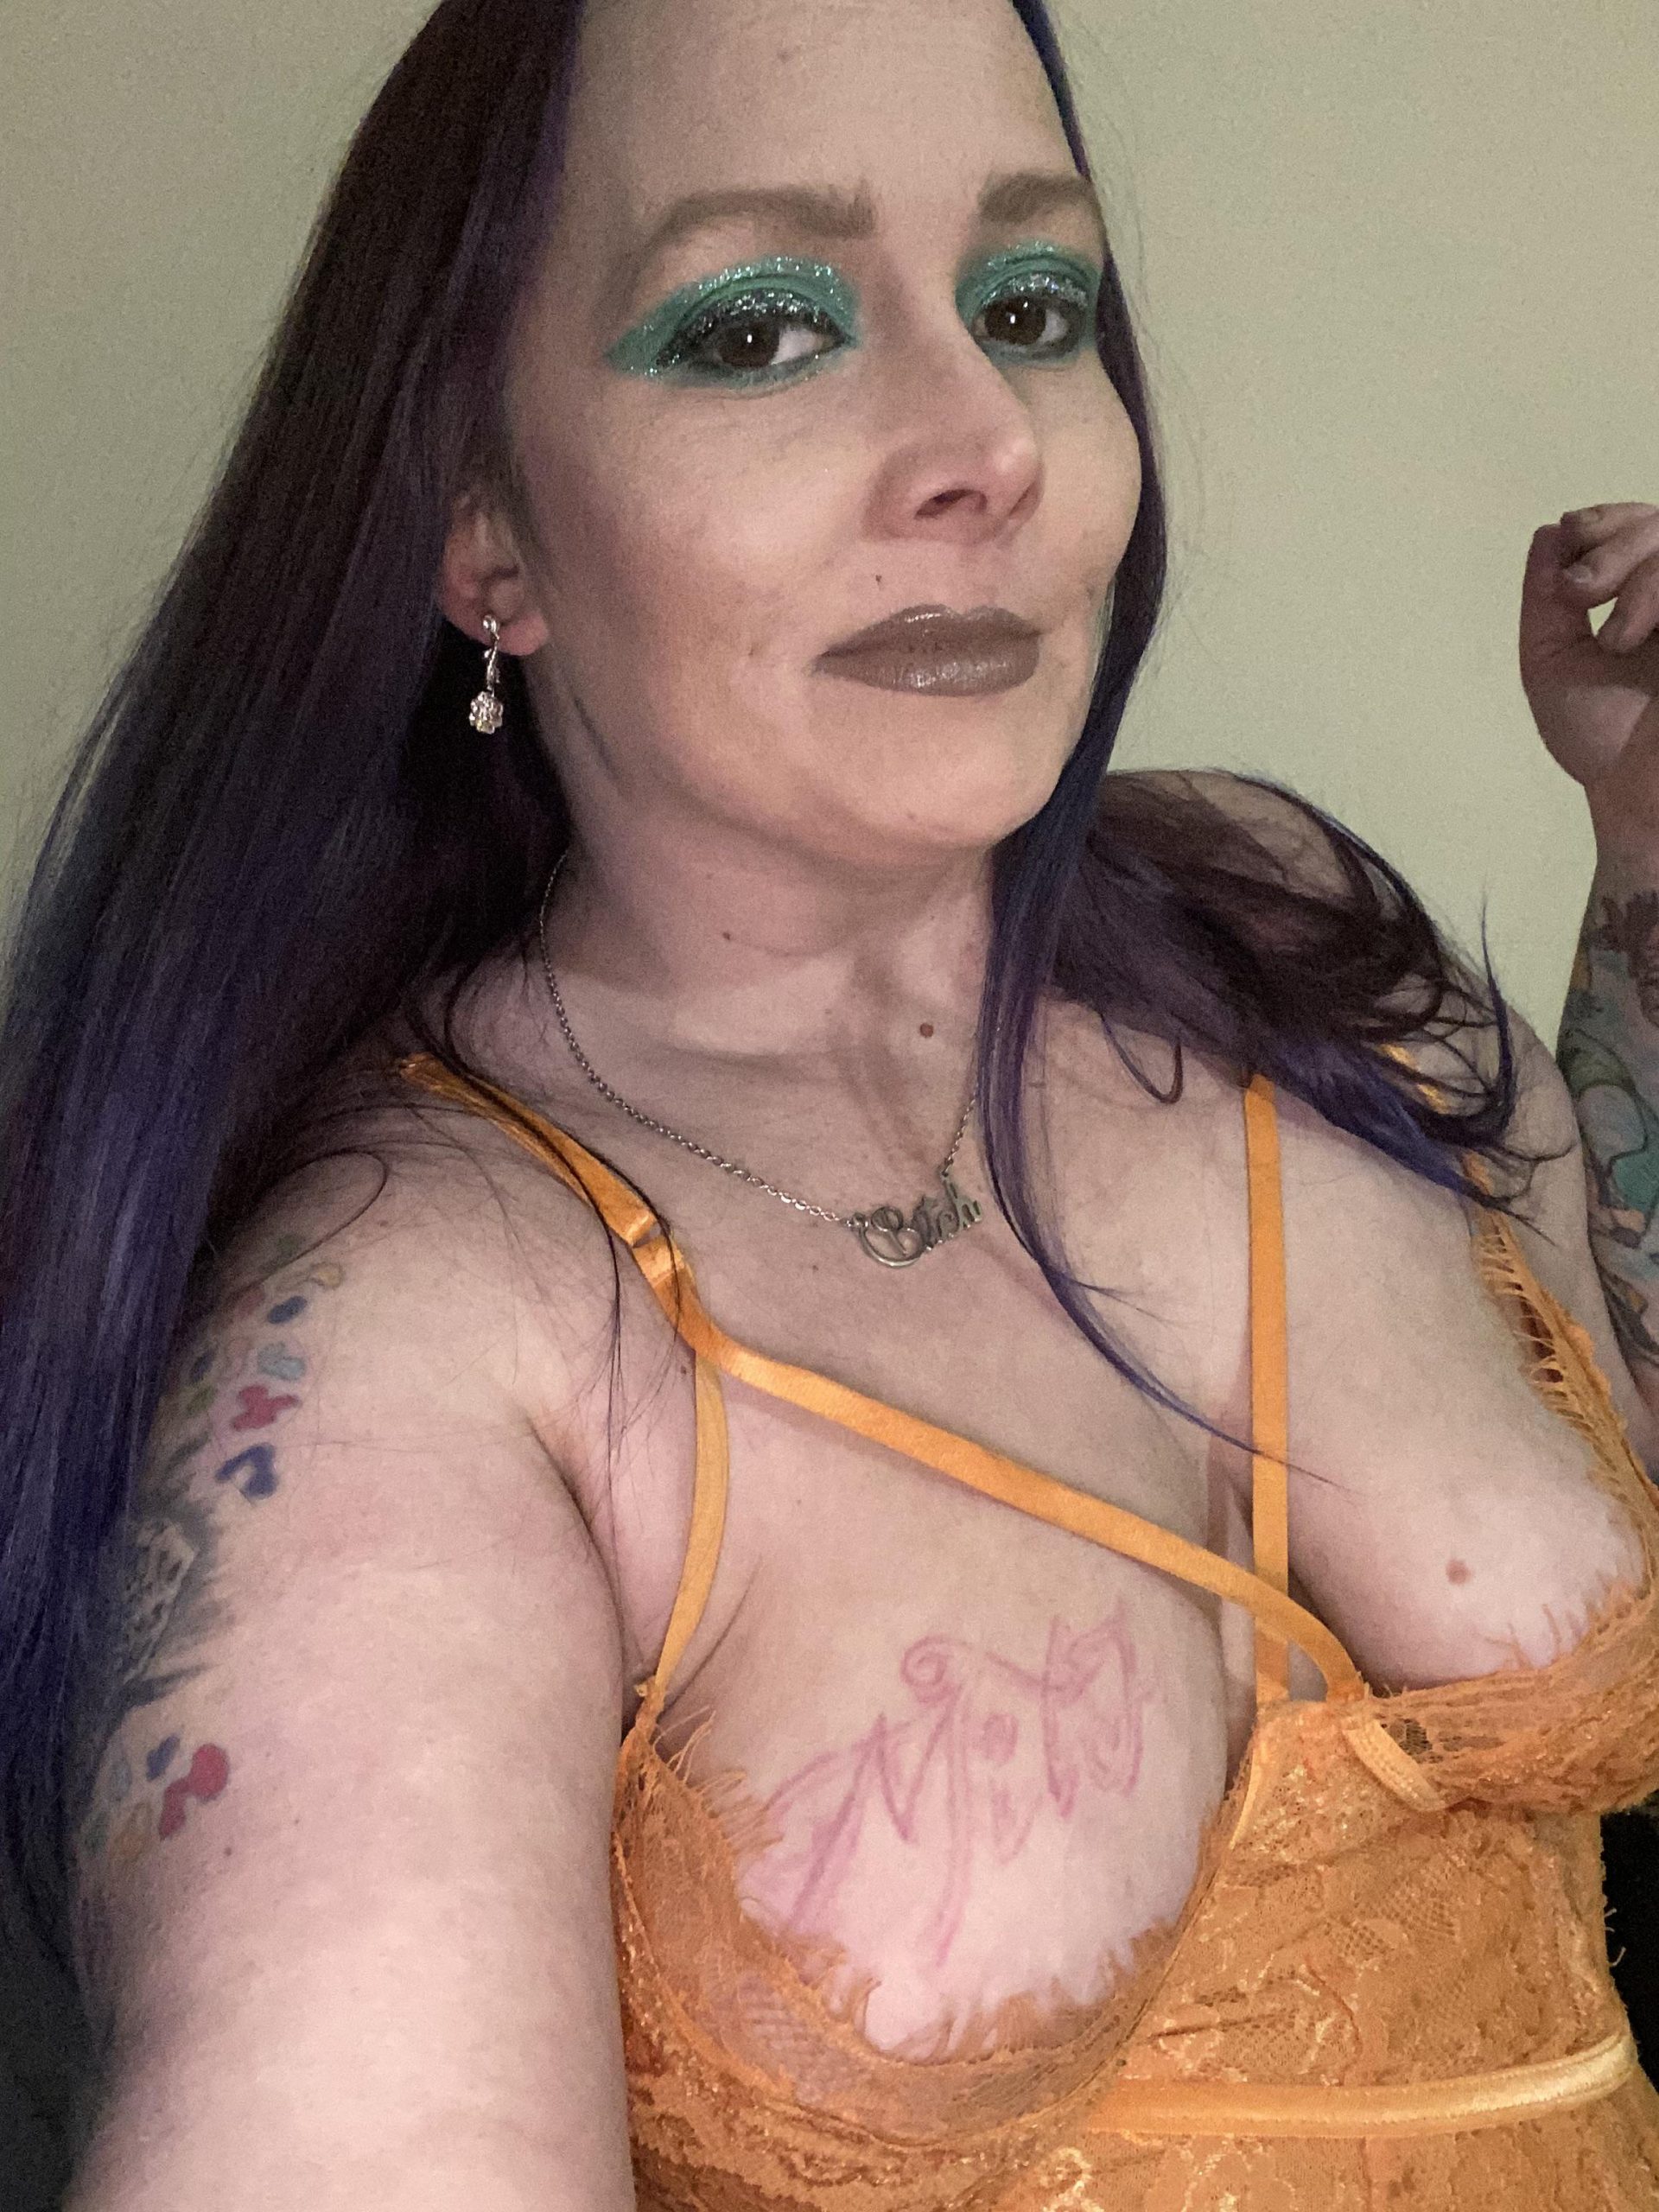 BBW Inked Milf! Solo&BG Content! Subscription Only. Kink Friendly?Interactive! Costumes&Cosplay, Anal Play Etc! 100’s Of Posts! Custom Videos PPV Everything Else Subscription Only! XGizmo1986x